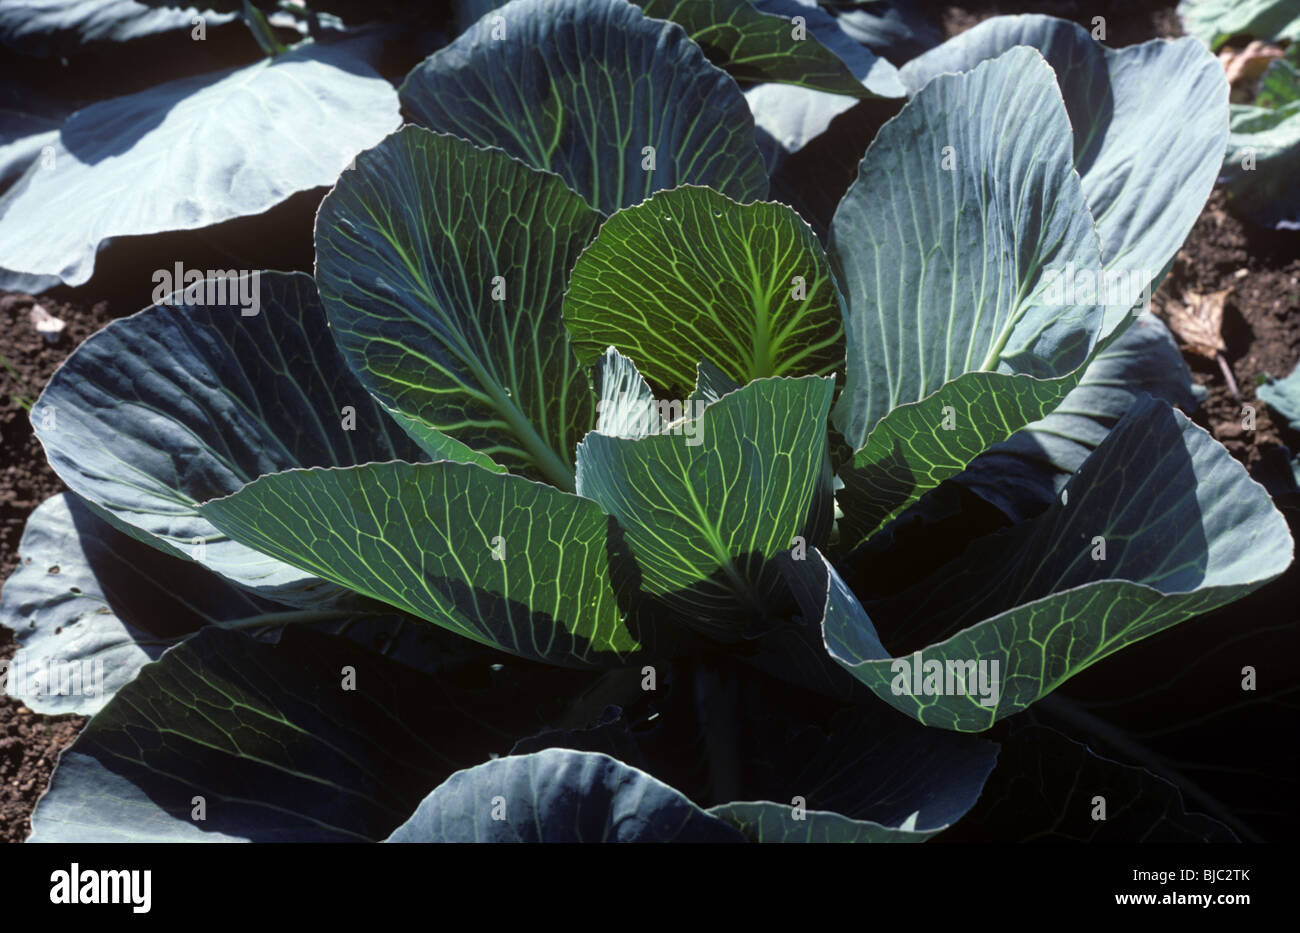 Maturing cabbage backlit and showing bold leaf veins Stock Photo